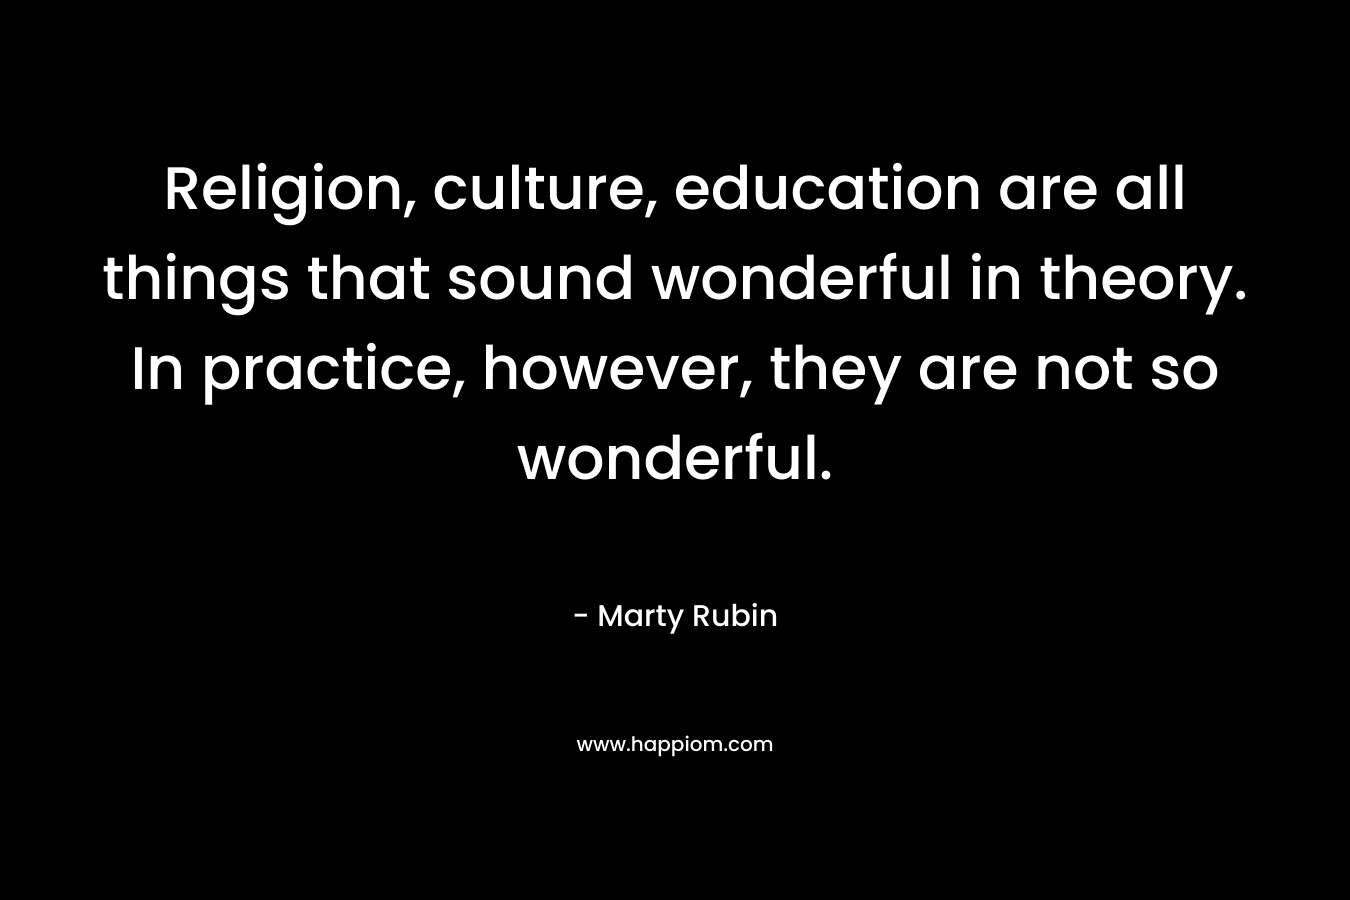 Religion, culture, education are all things that sound wonderful in theory. In practice, however, they are not so wonderful.